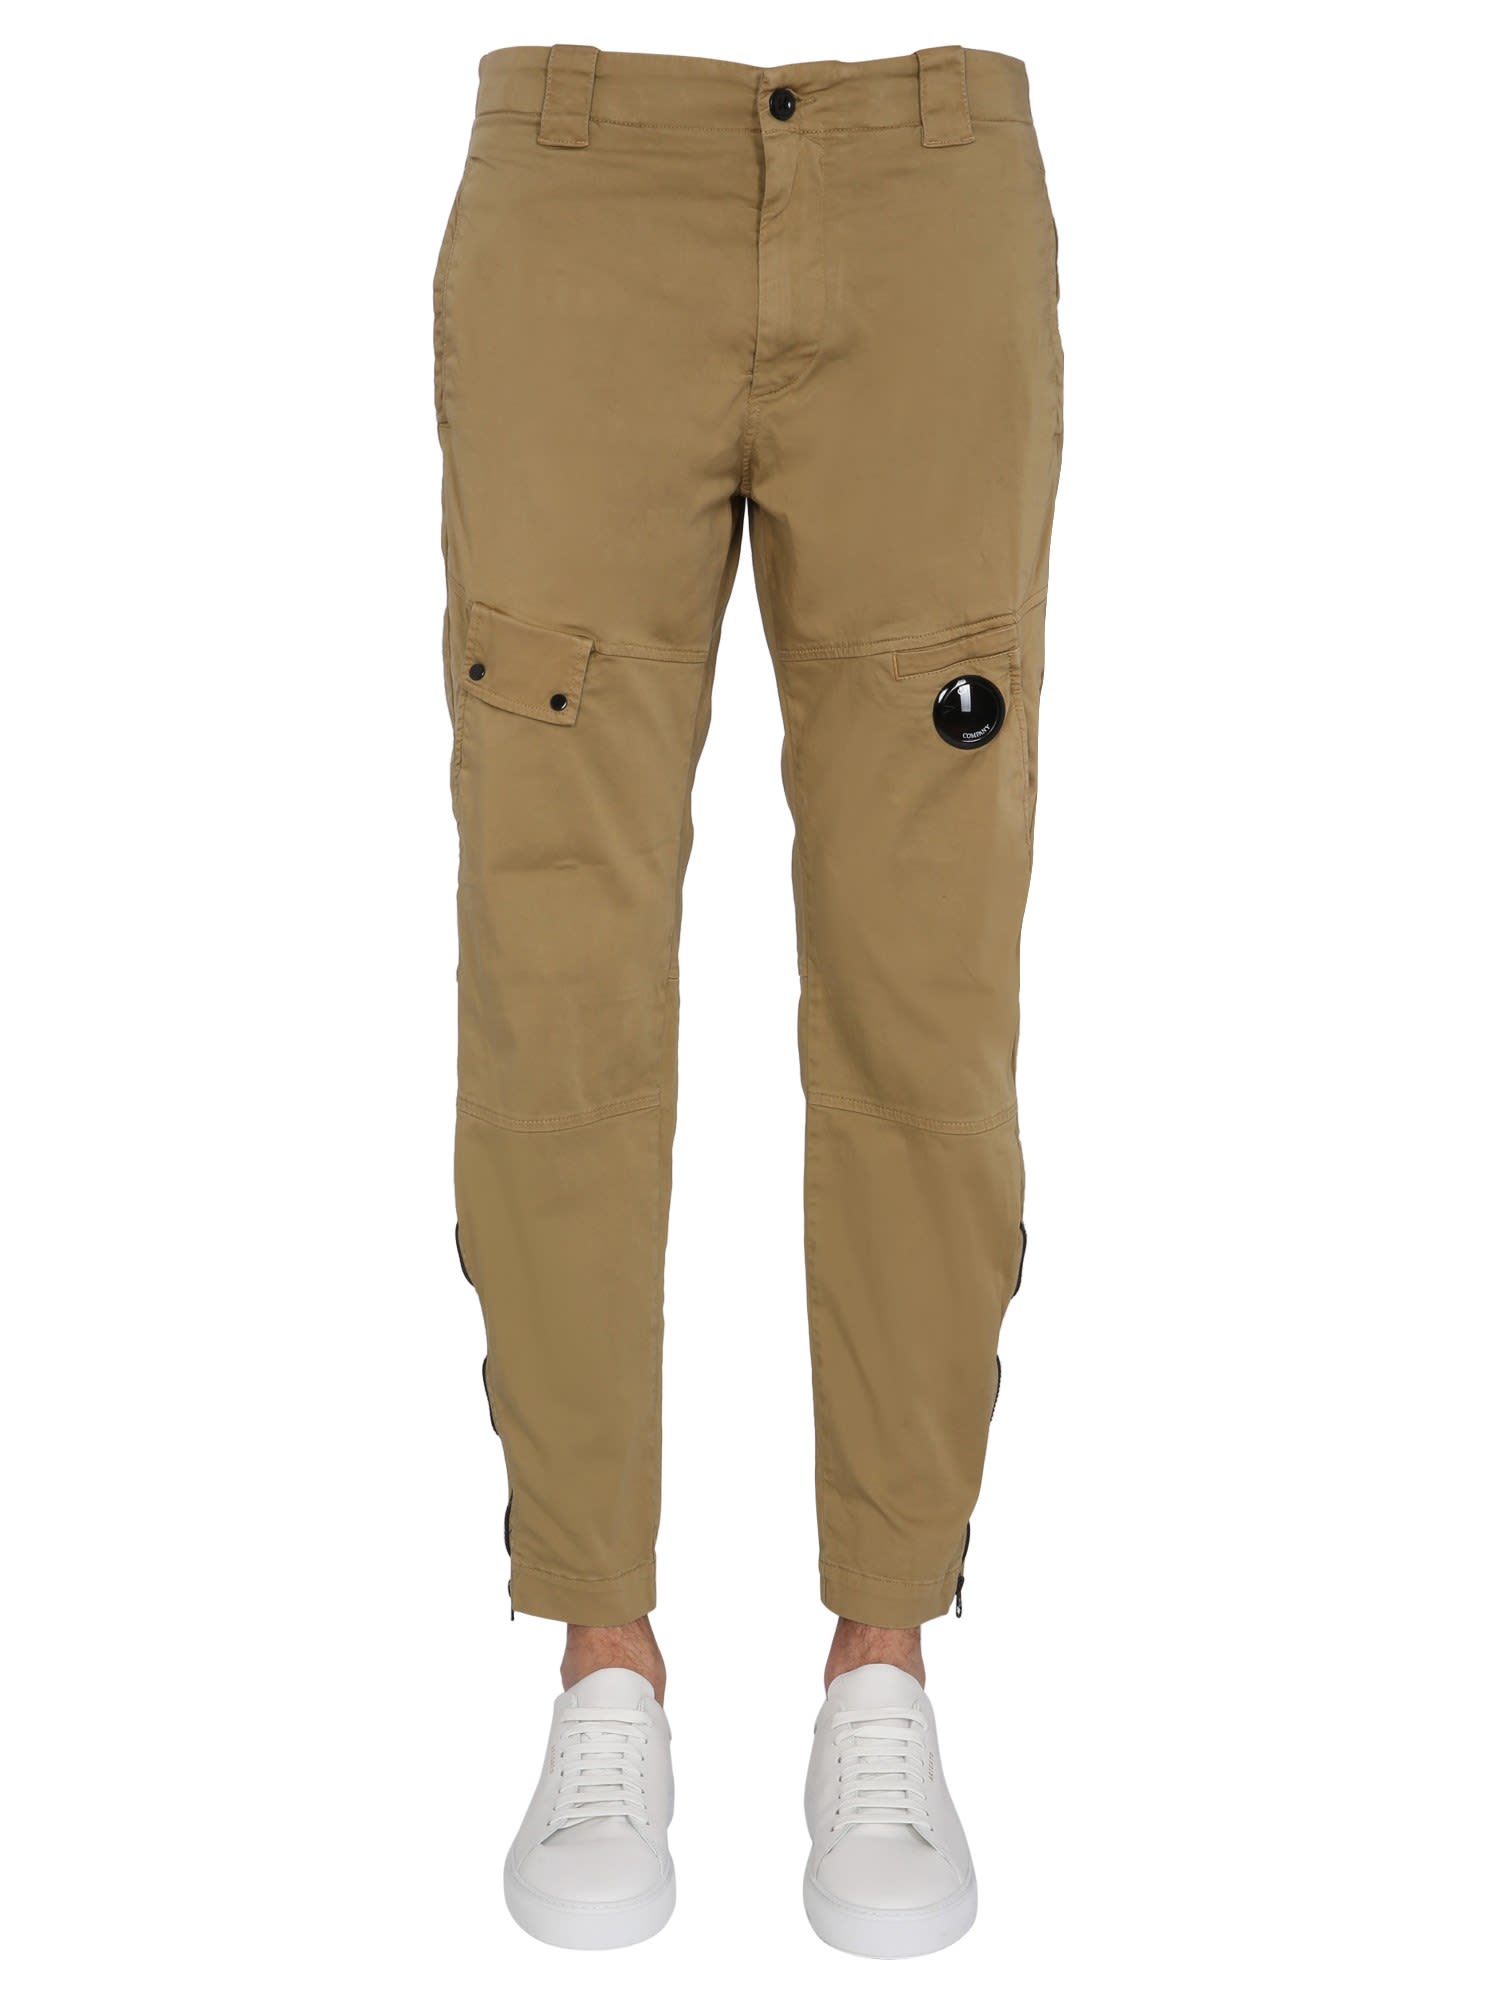 C.P. Company Trousers With Iconic Lens